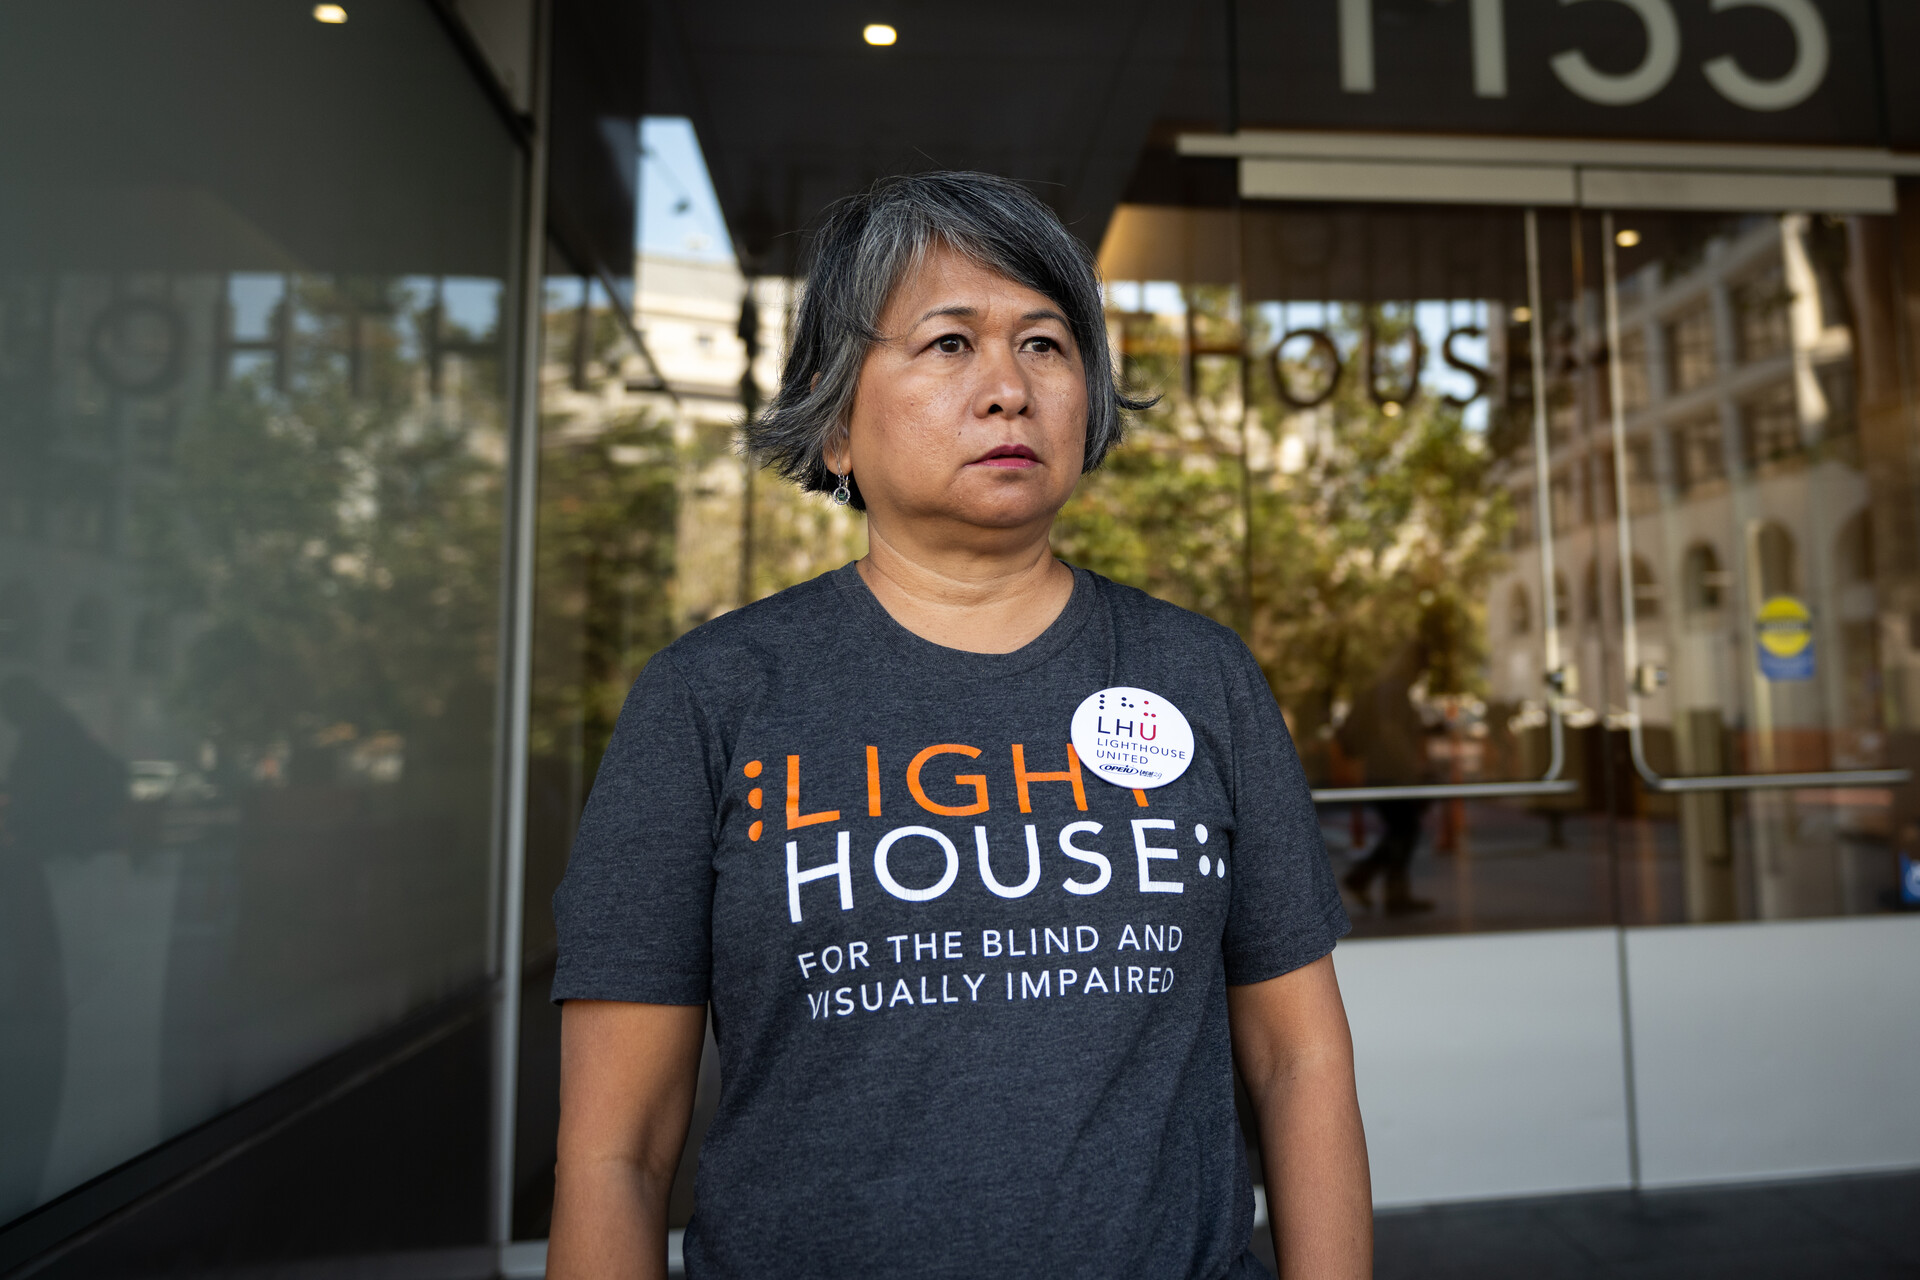 An Asian woman with short hair stands in front of a building wearing a LIGHTHOUSE shirt, looking to the side away from the camera.